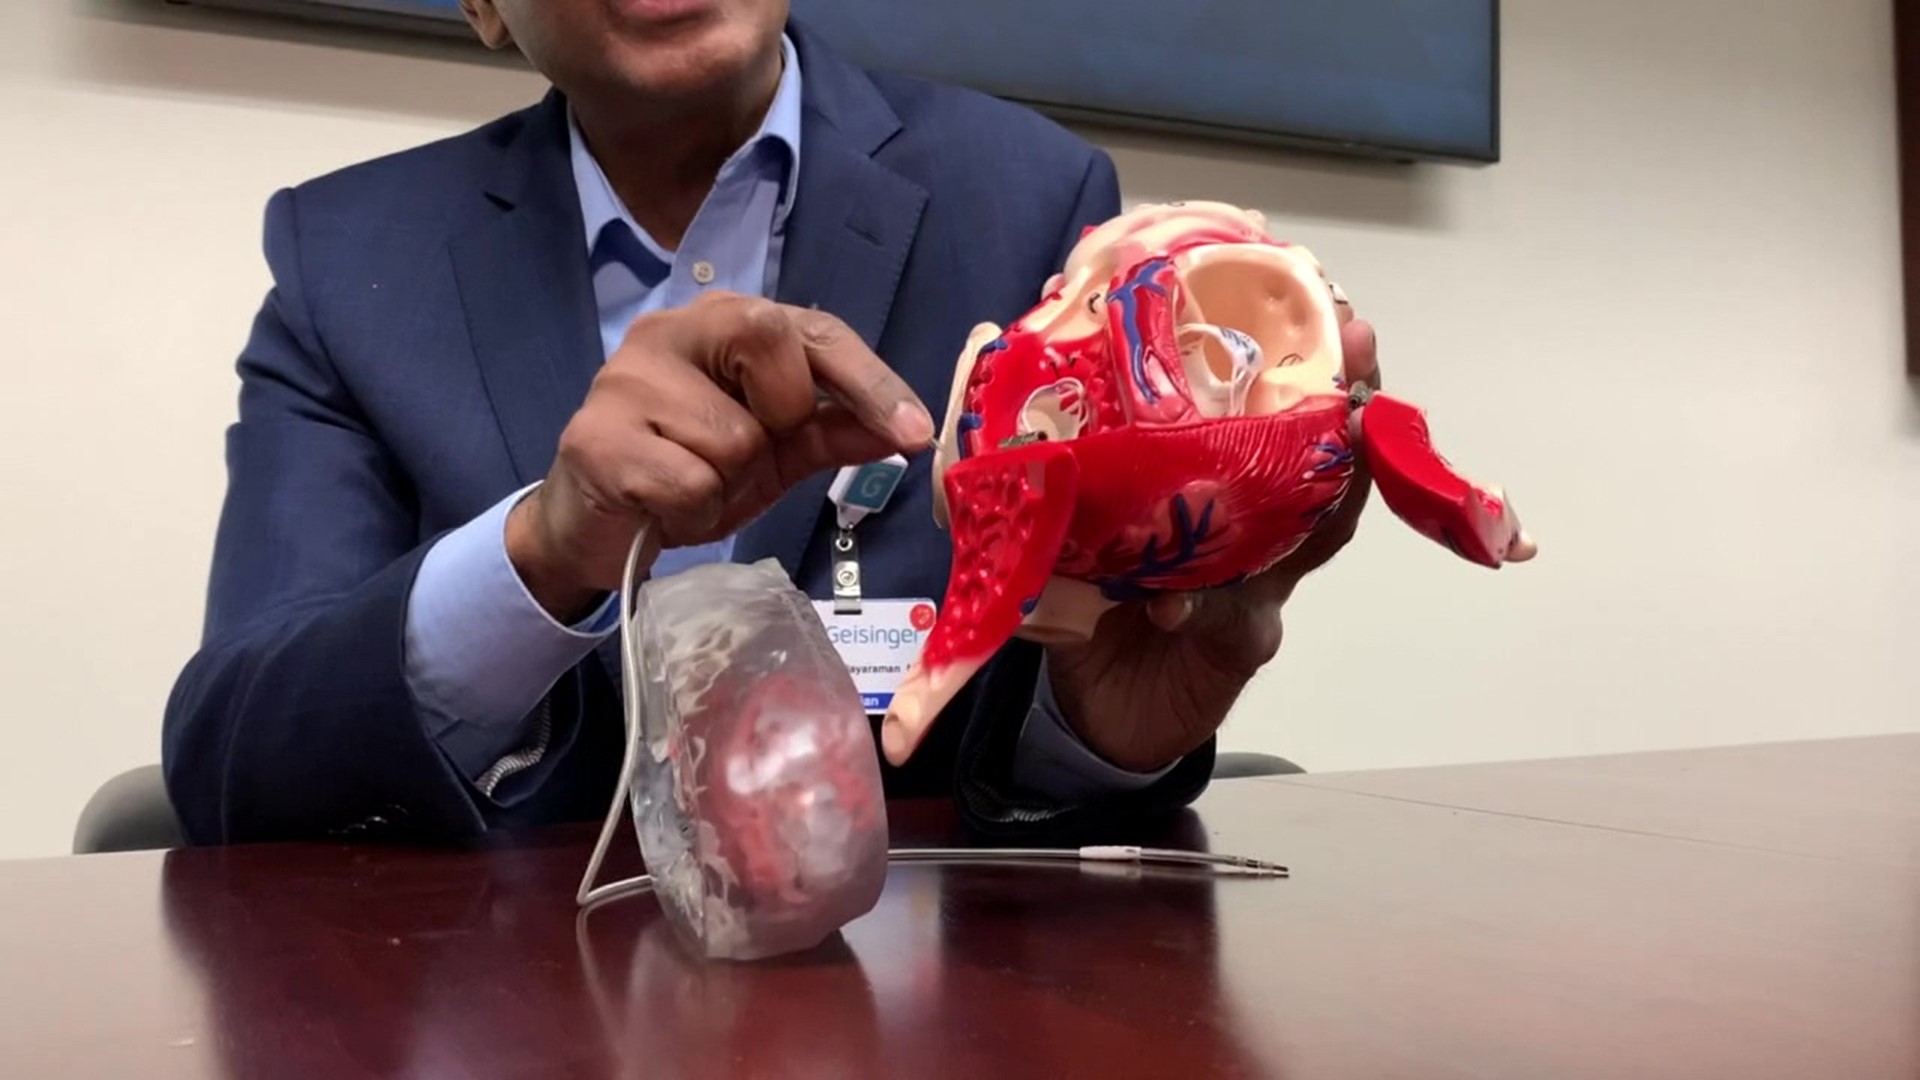 February is known as American Heart Month and Geisinger Health System is showcasing new methods of treating patients with heart rhythm disorders.